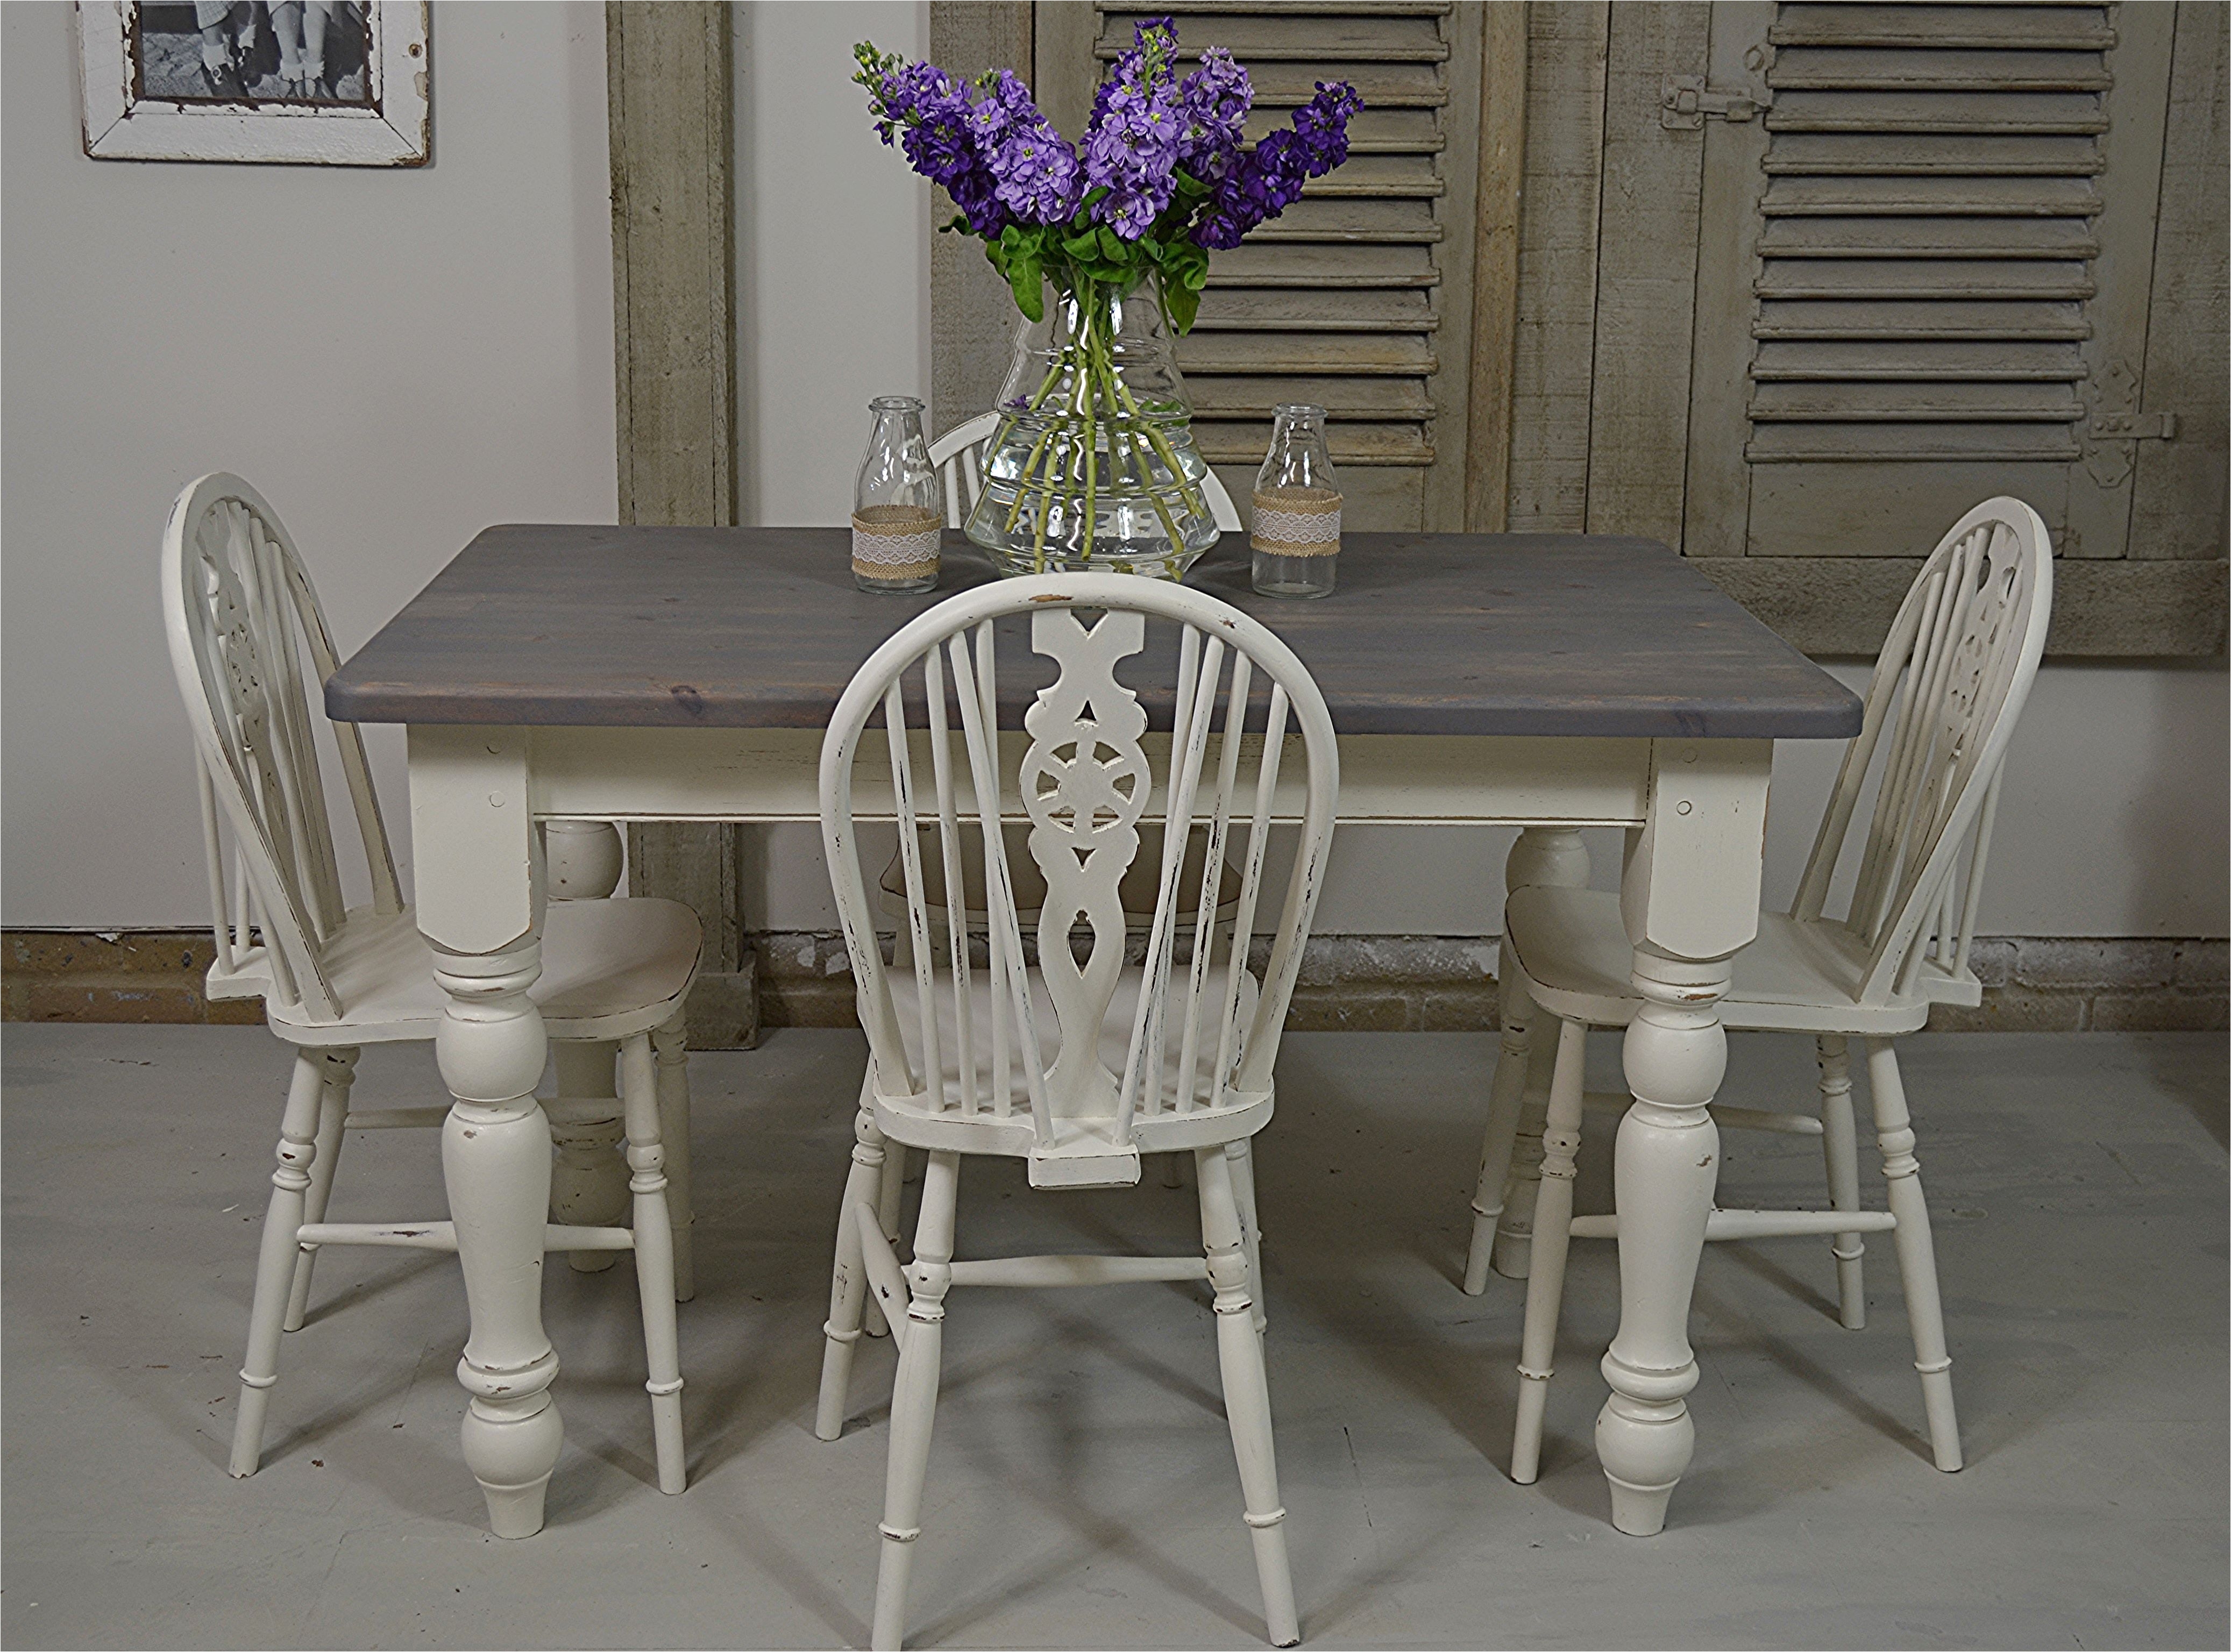 unfinished furniture michigan luxury farmhouse style in abundance with this country dining set painted